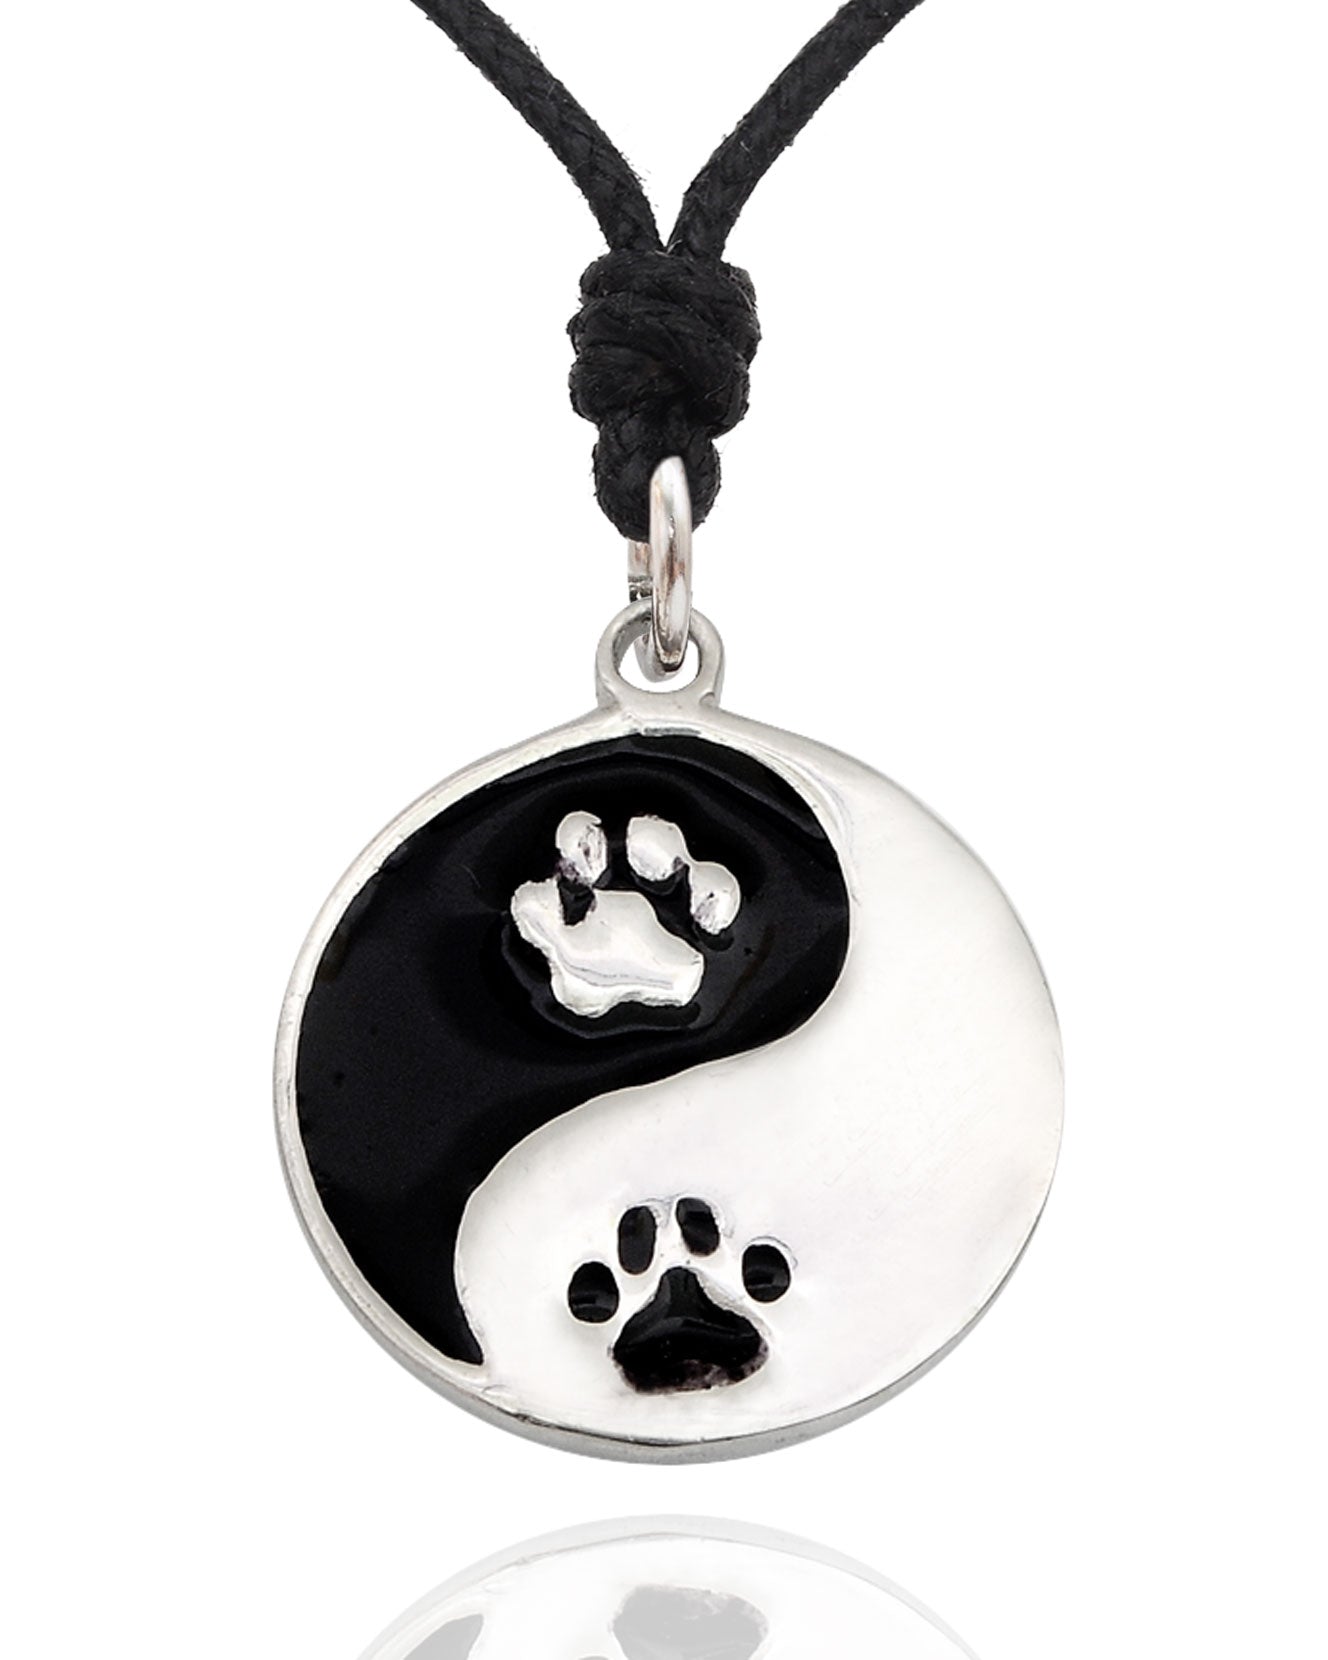 New Dog Paws Yin Yang Silver Pewter Charm Necklace Pendant Jewelry